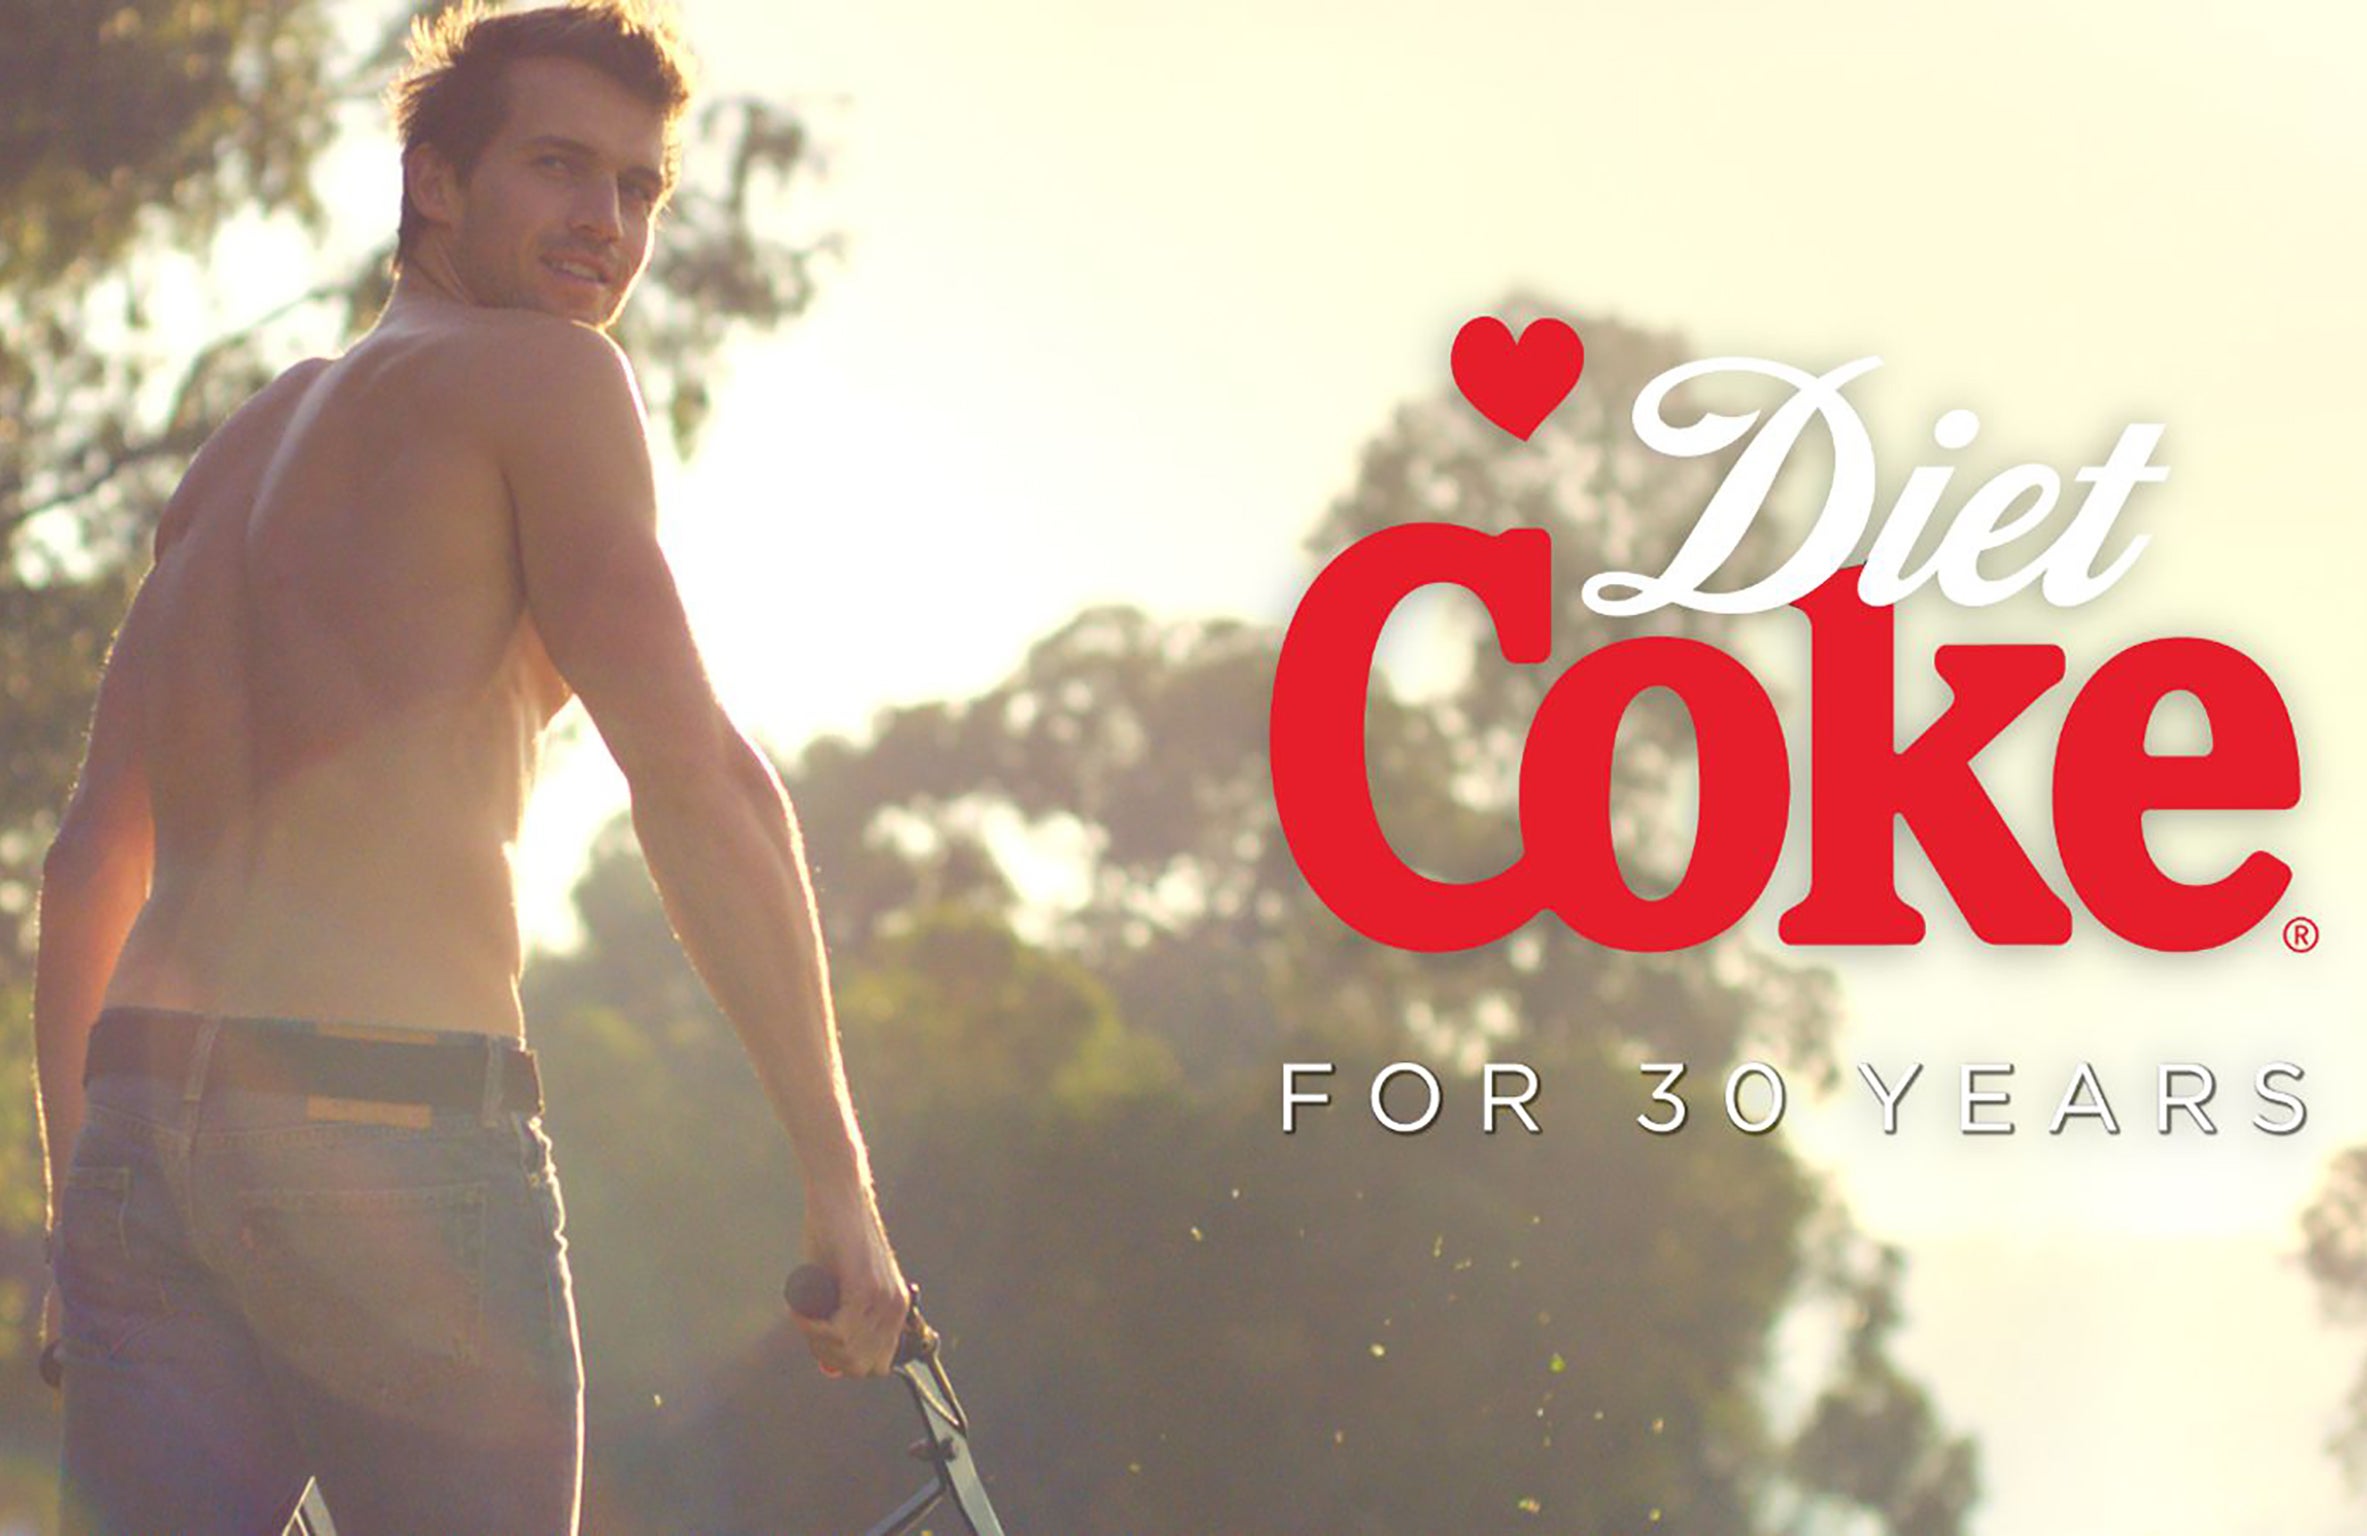 The model Andrew Cooper is ogled by a group of women in a 2013 British advert for Diet Coke